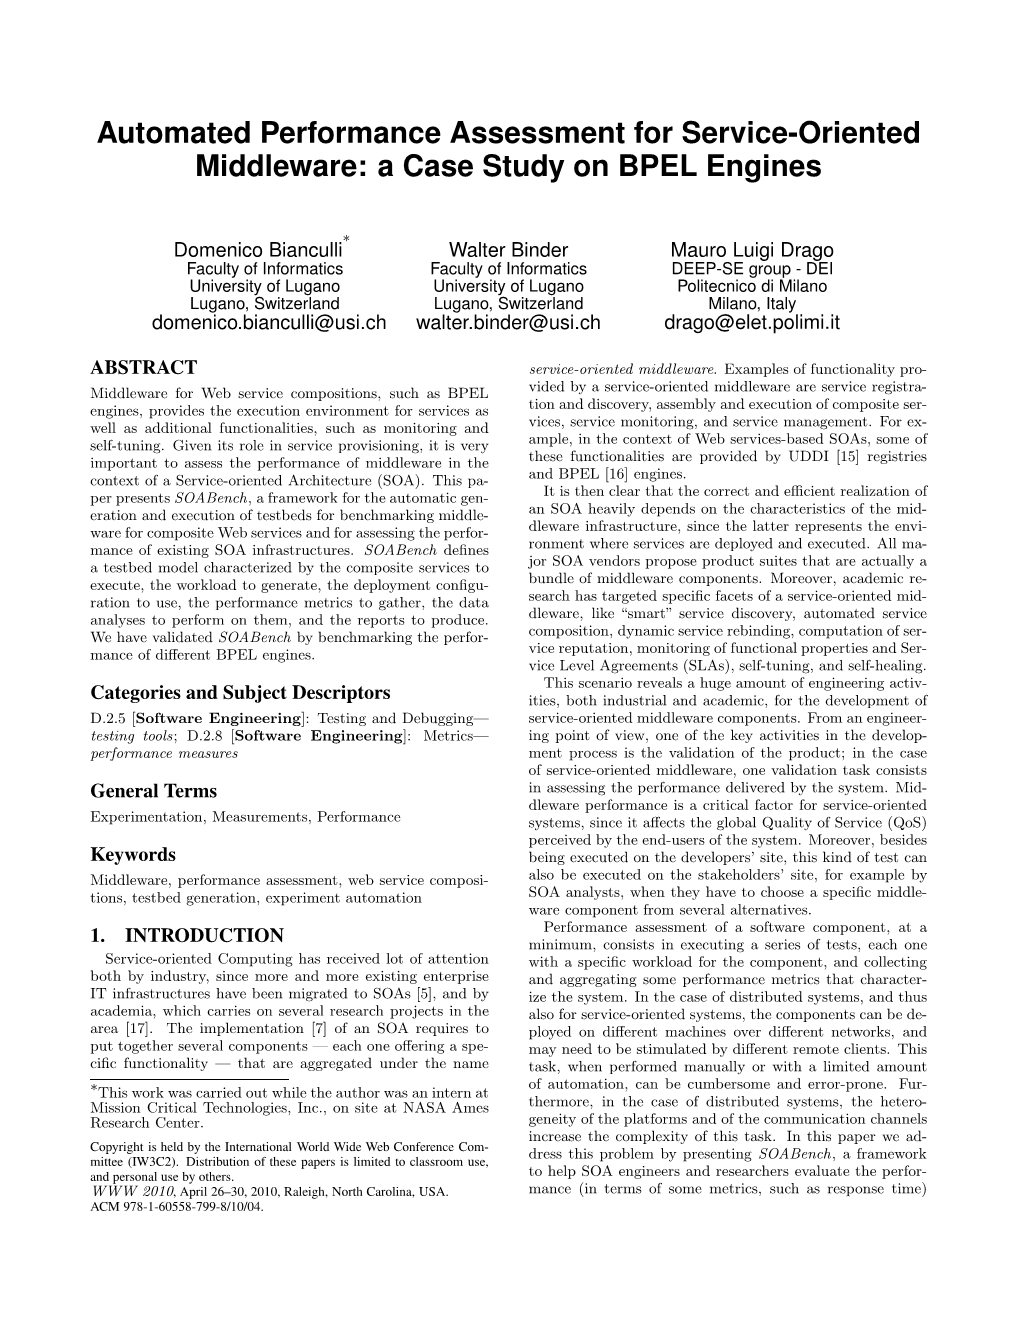 Automated Performance Assessment for Service-Oriented Middleware: a Case Study on BPEL Engines